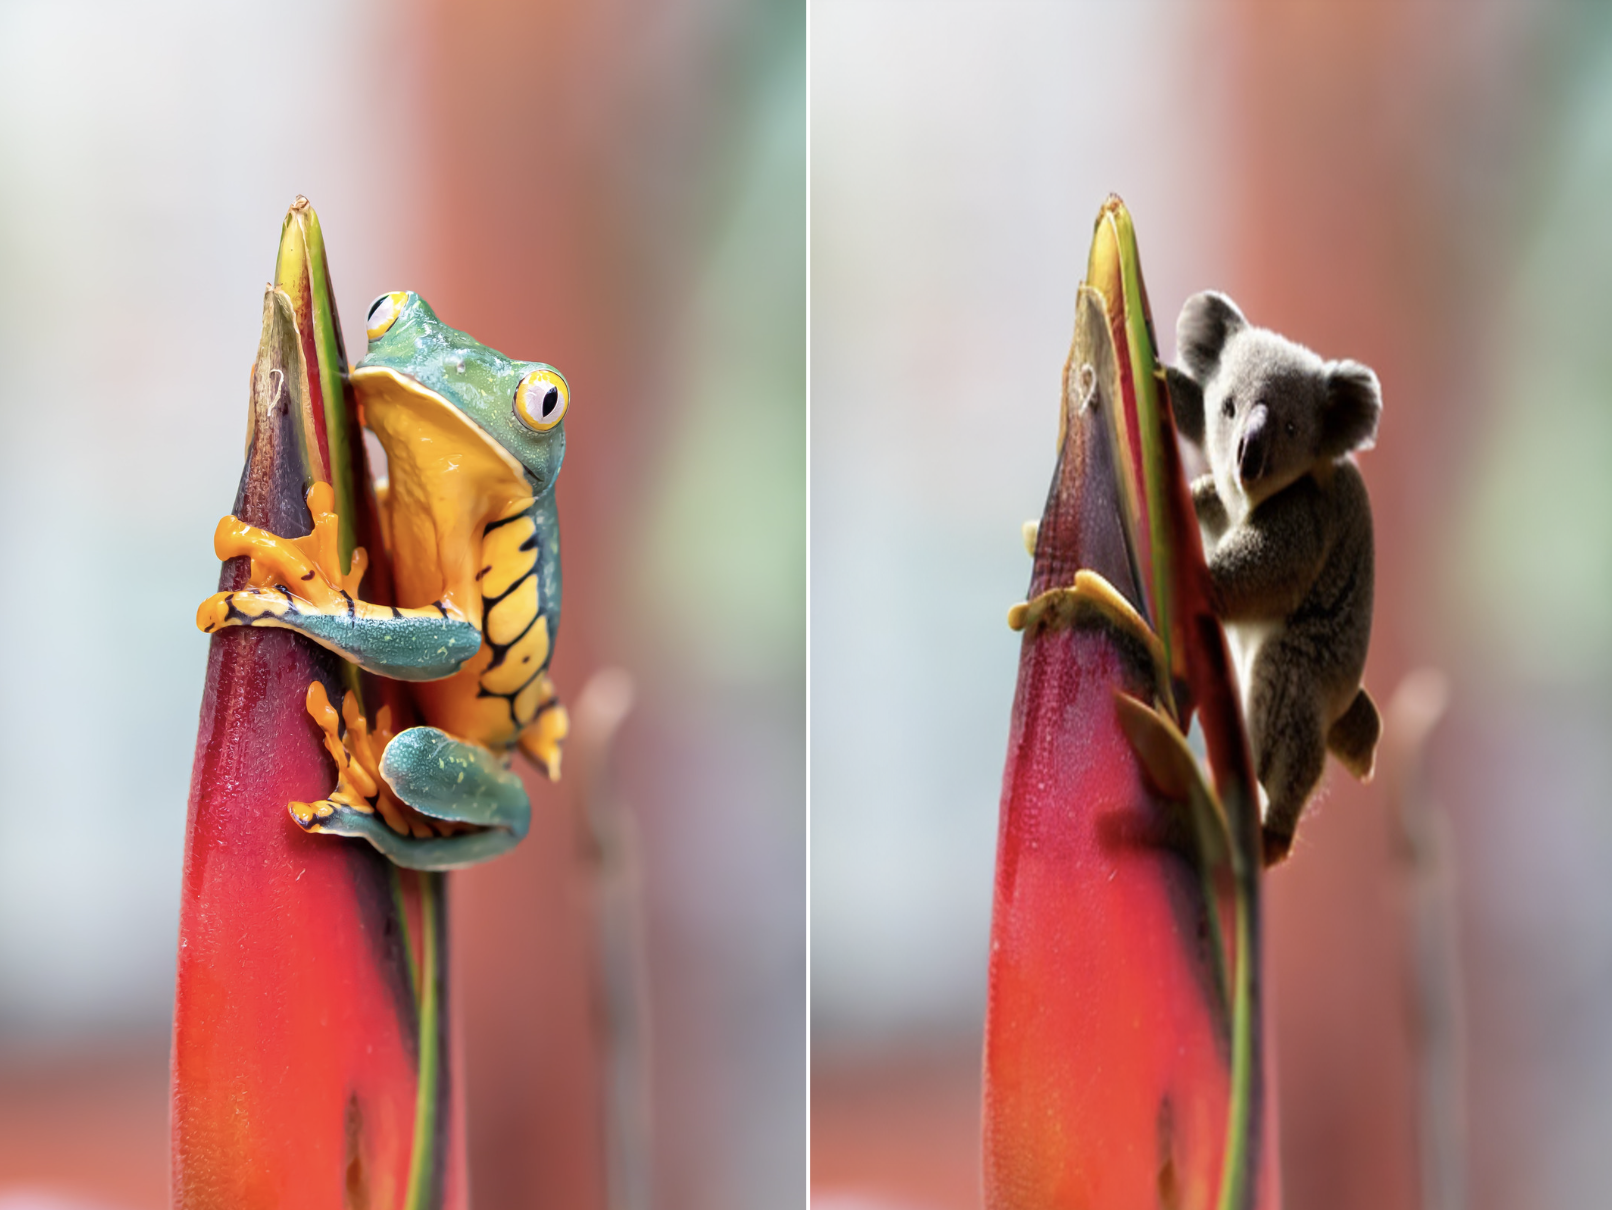 Two side-by-side images. The lefthand image is the original image of a frog clinging to a tropical-colored flower with a bright, blurry background. The image on the right is the same image, only the frog has been replaced by an AI-generated koala bear. Image made with with SAM + Stable Diffusion.